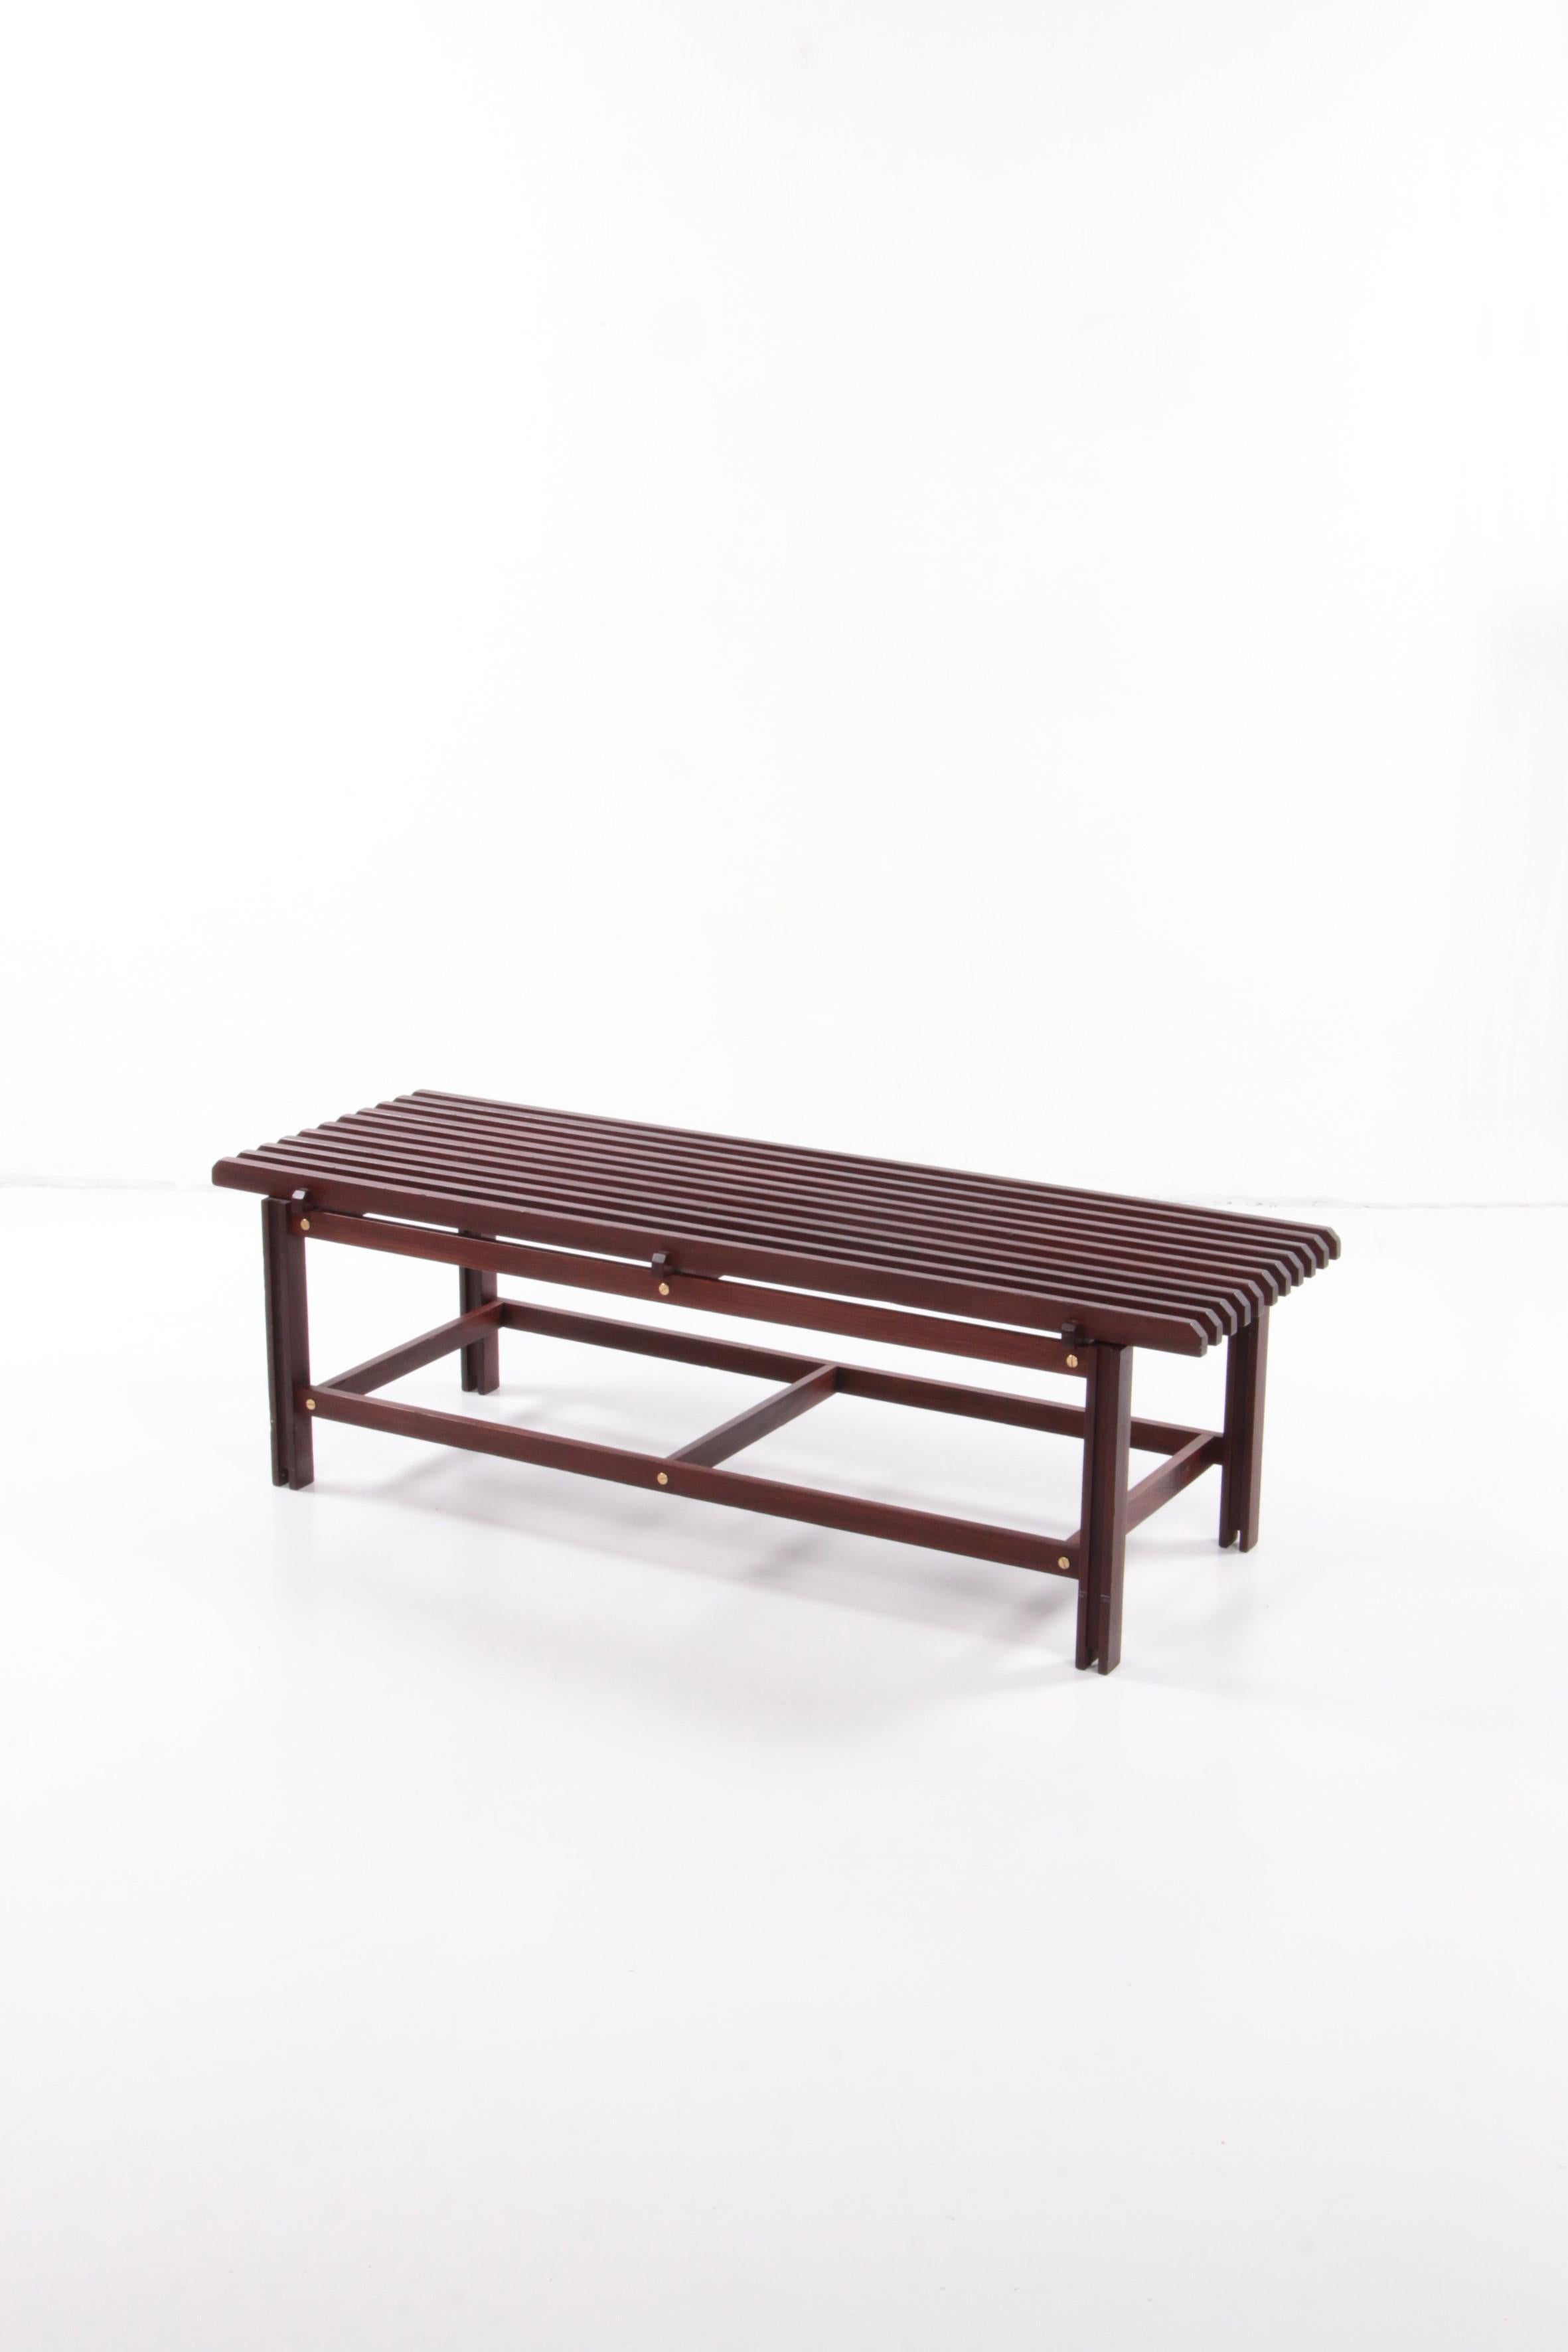 Ico & Luisa Parisi designed Wooden bench made in Italy in 1960

Beautiful Italian wooden bench, the model is by designer Ico & Luisa Parisi, made in Italy in the 1960s.

The wooden construction is fastened together by beautiful brass